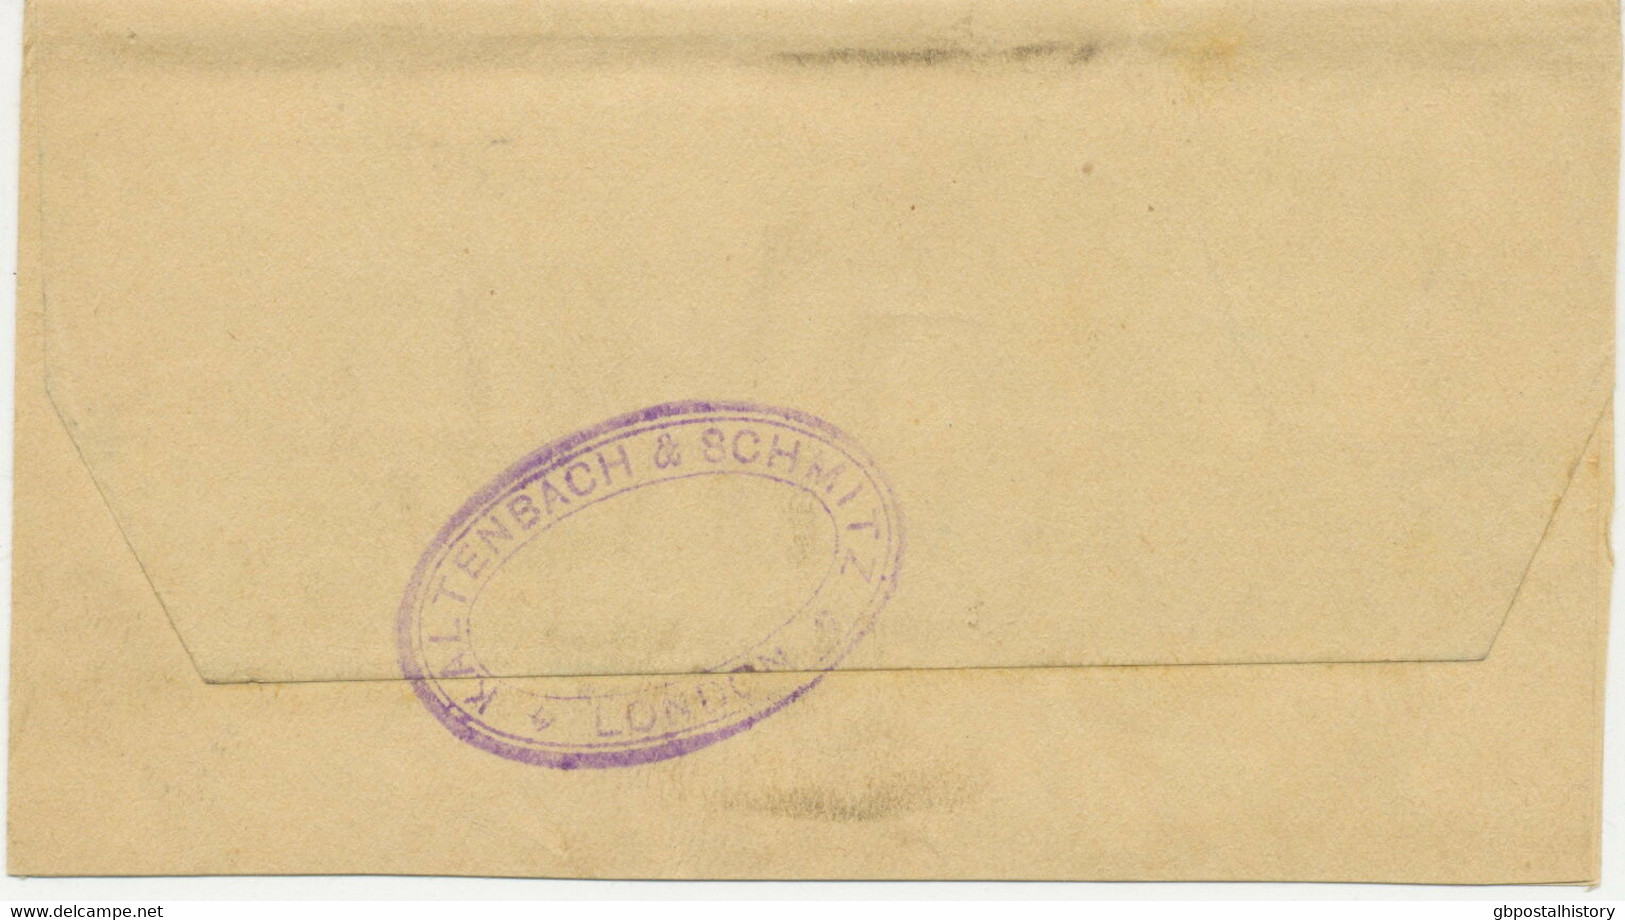 GB 189? QV 1/2 D Wrapper Uprated W 1/2 D Jubilee From LONDON "FB" To SINGAPORE - Briefe U. Dokumente